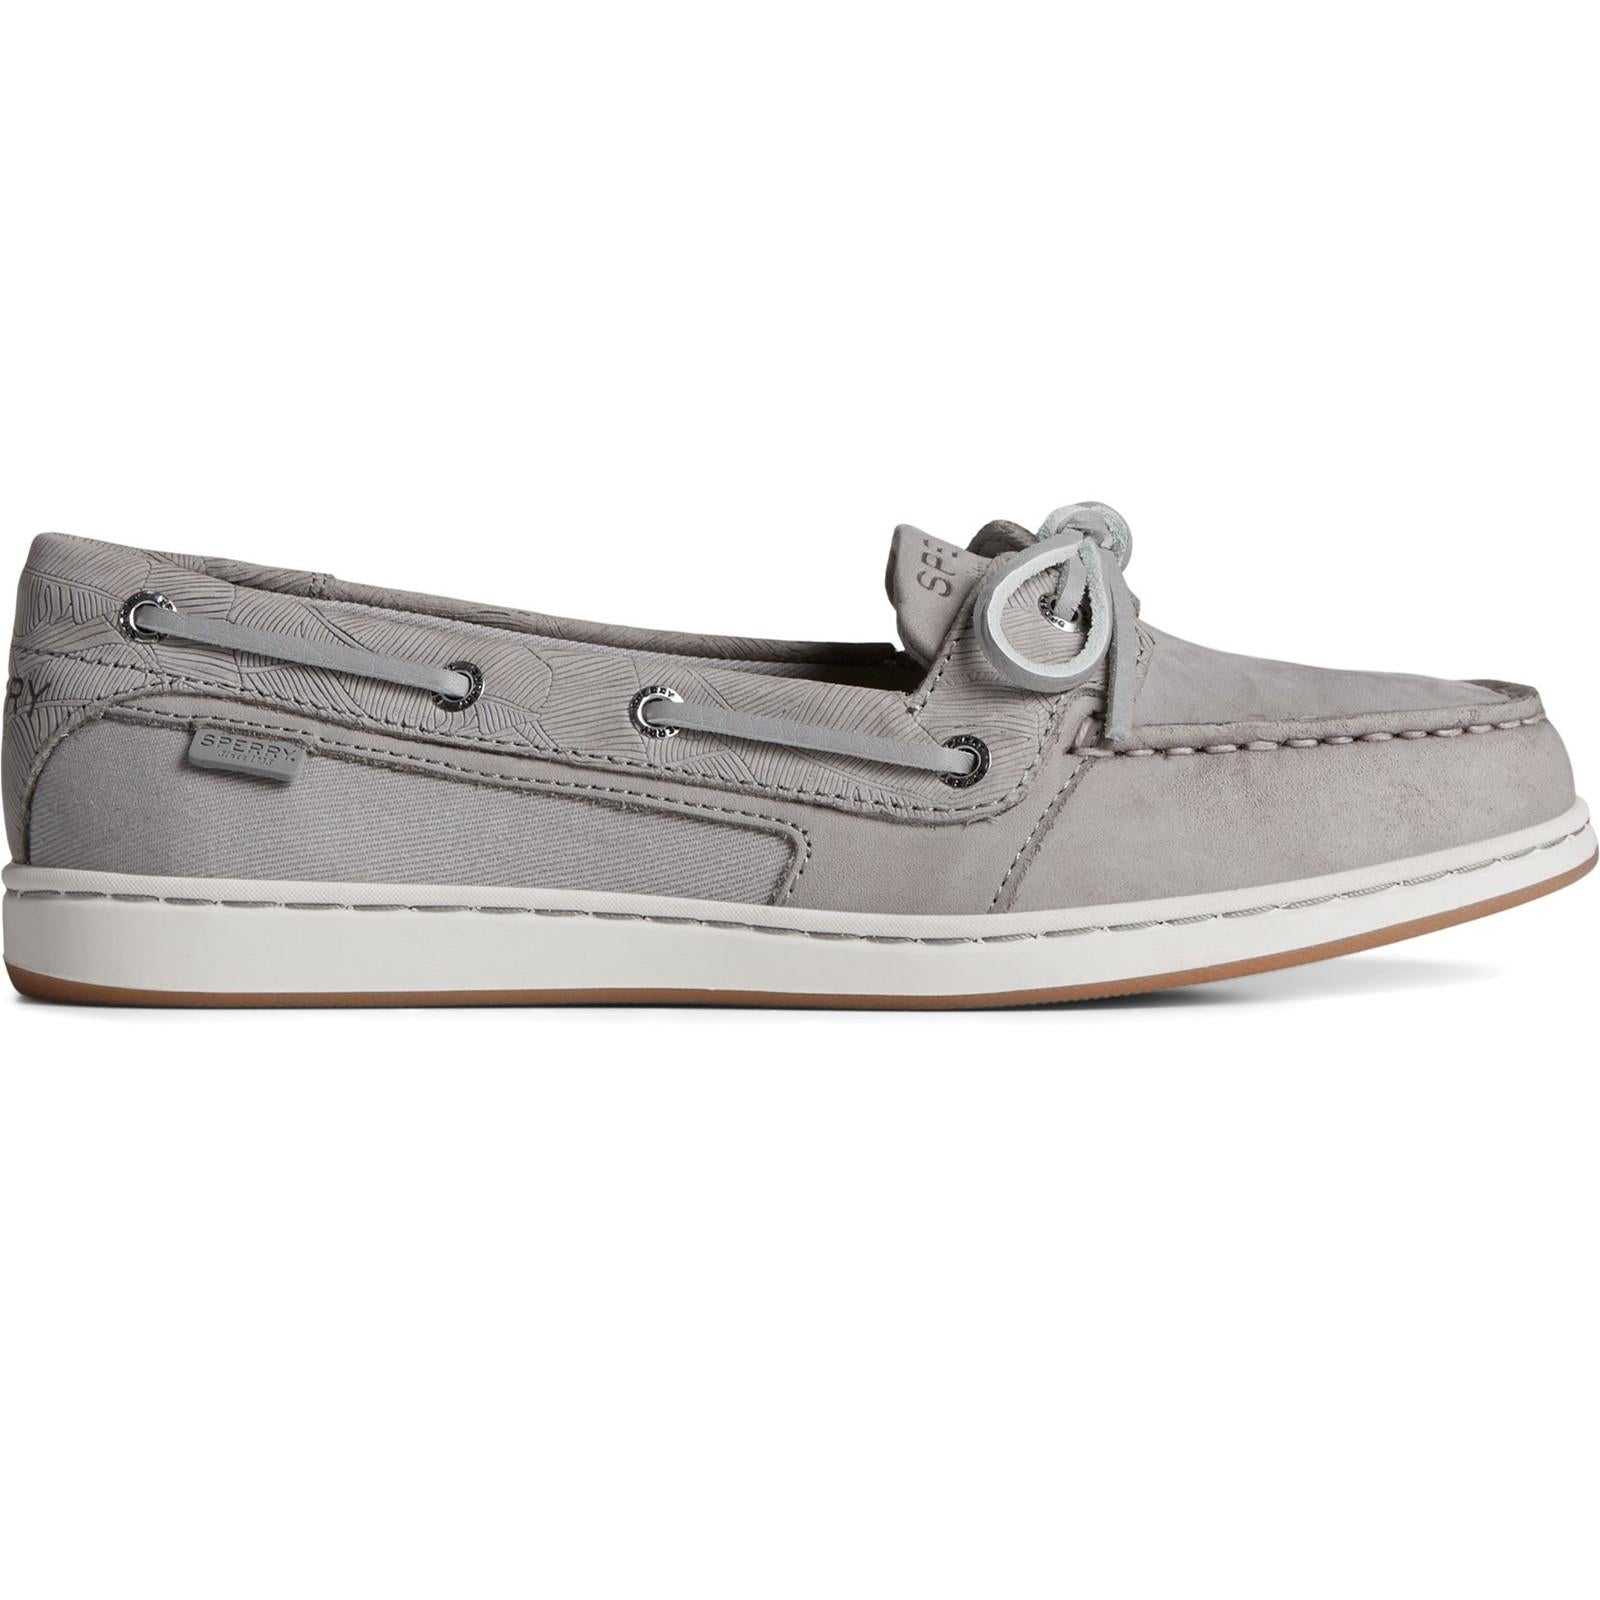 Sperry Top-sider Starfish Emboss Shoes